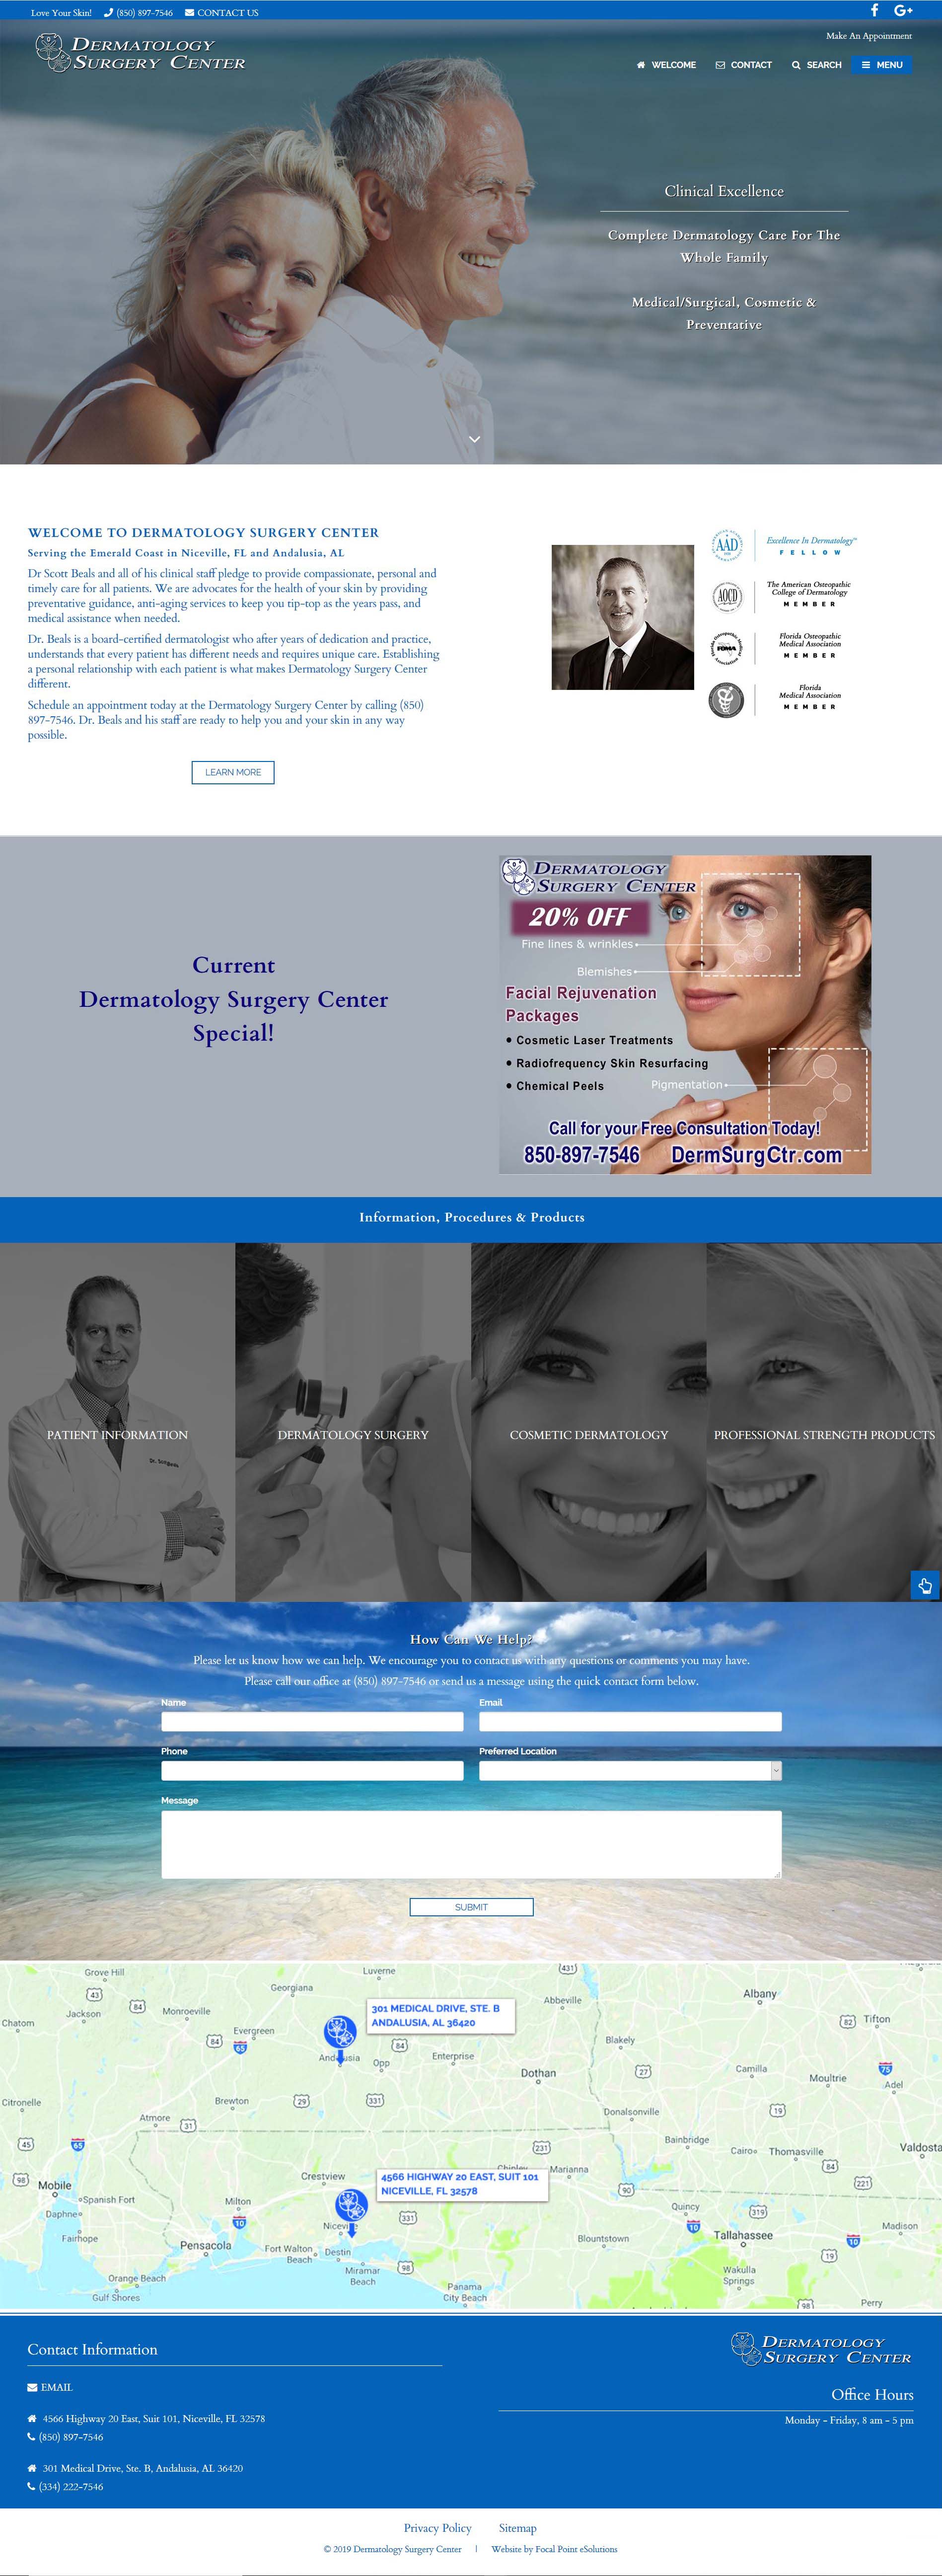 Dermatology Surgery Center Website - Niceville & Andalusia